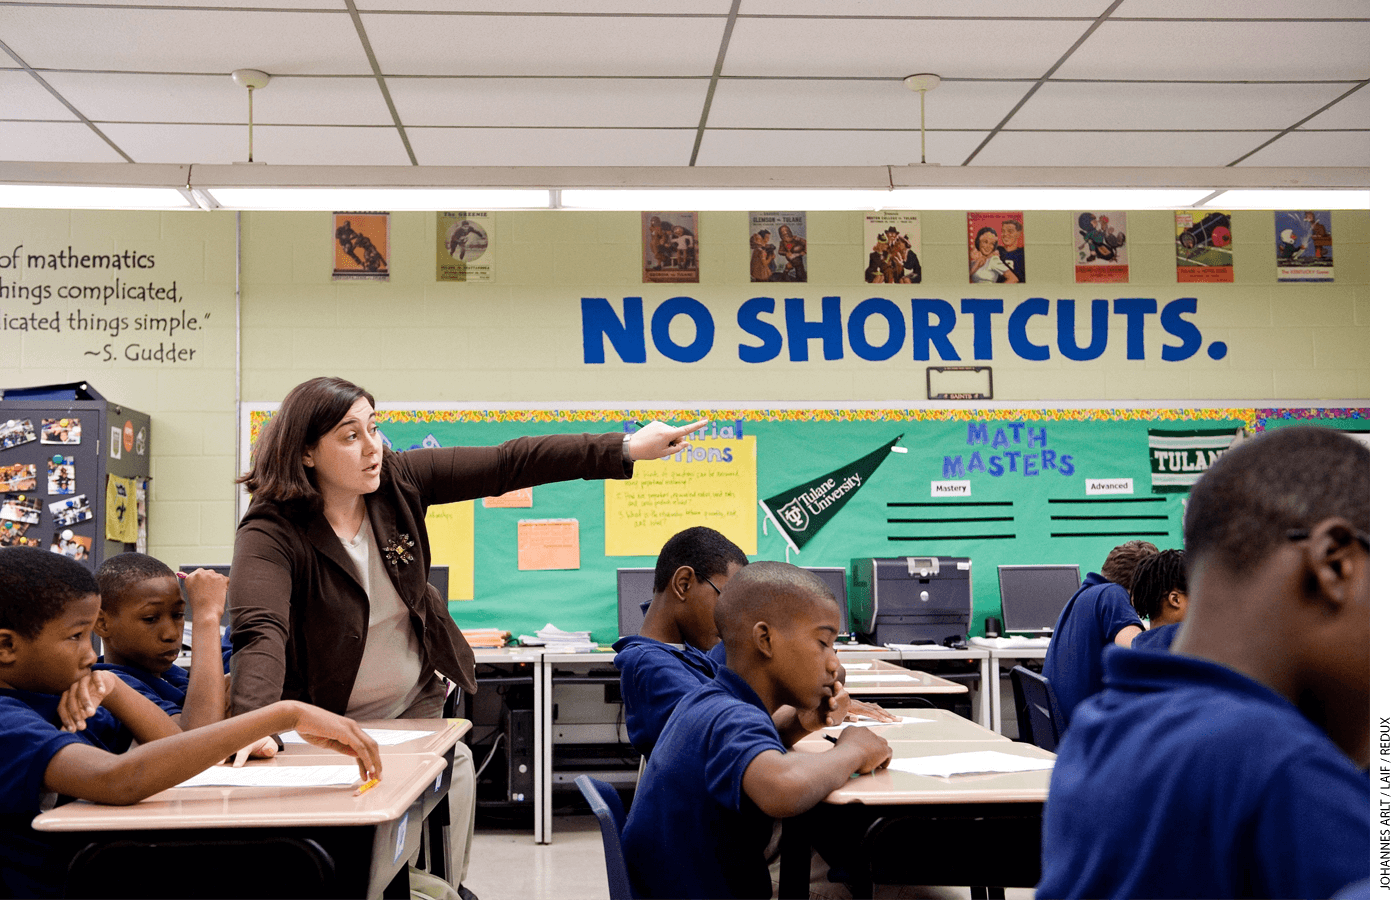 Block letters on a classroom wall remind students that there are “no shortcuts” at KIPP Believe College Prep in New Orleans, part of the KIPP network that pioneered the no-excuses model.